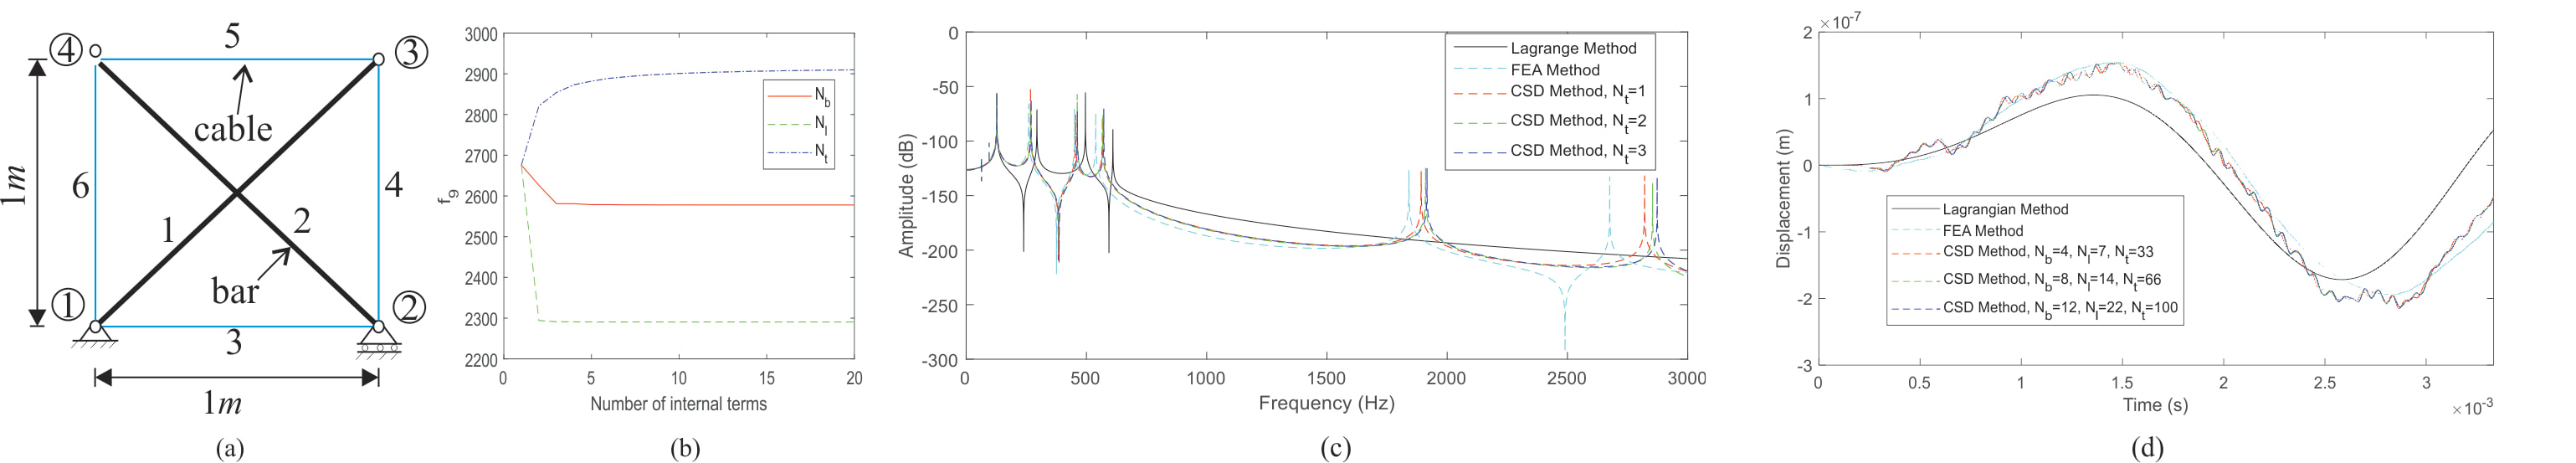 Simulation results of the CSD method (a) initial configuration of the planar Snelson's tensegrity structure; (b) history of convergence of the last natural frequency; (c) frequency responses of node four; and (d) displacement of node three in the x-direction at the excitation frequency of 15000 Hz.